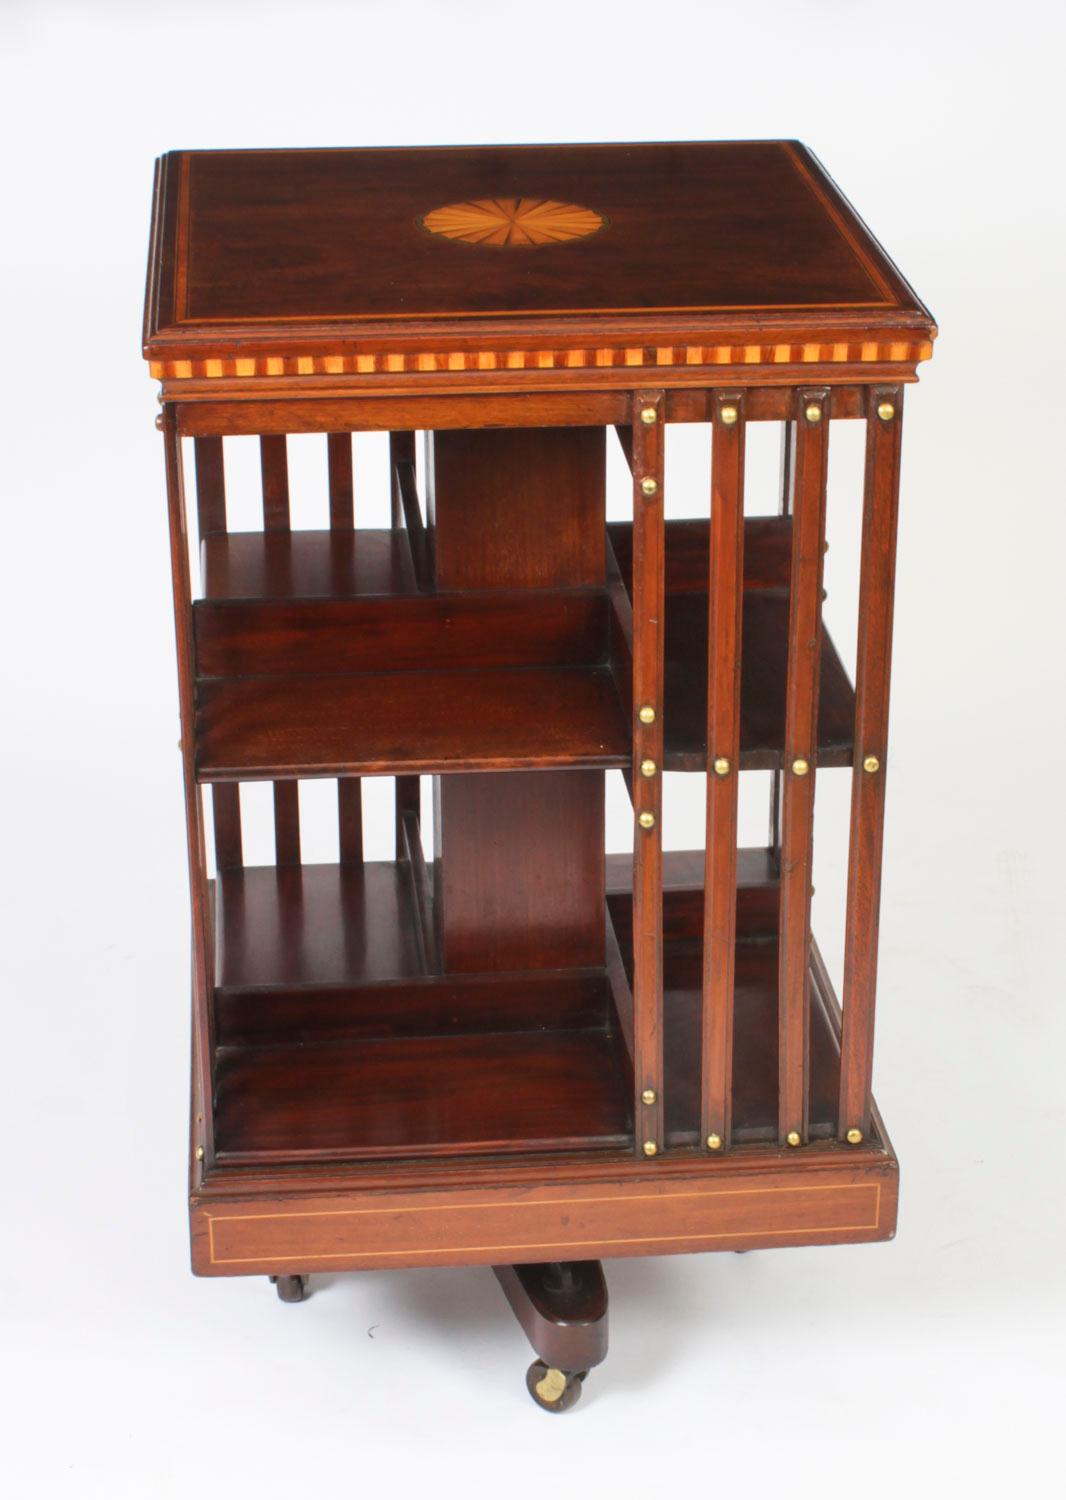 Victorian Antique Edwardian Revolving Bookcase Flame Mahogany c.1900 For Sale